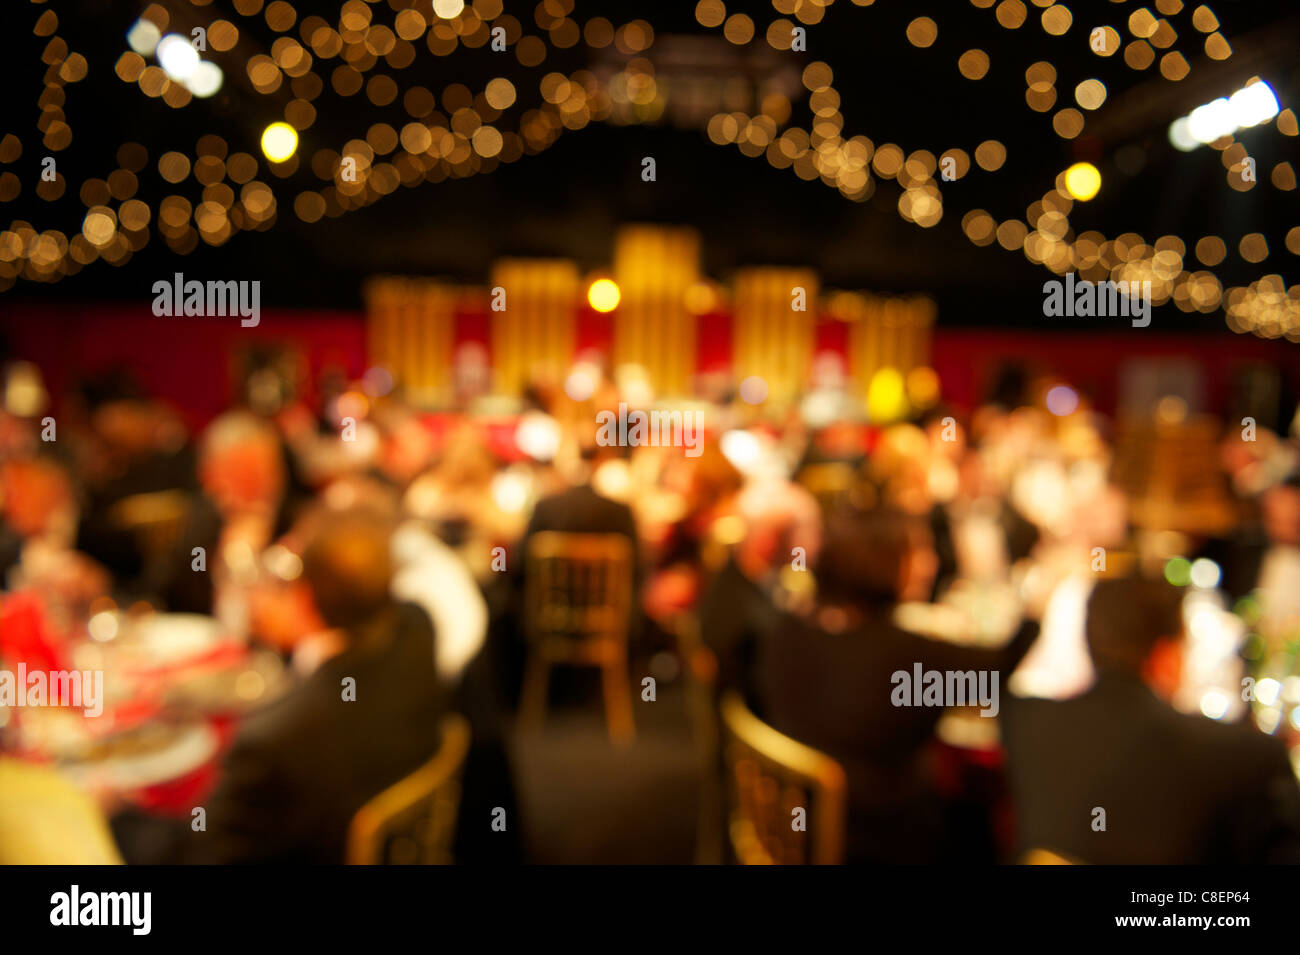 Abstract blurred background of diiner tables at large party or banquet Stock Photo